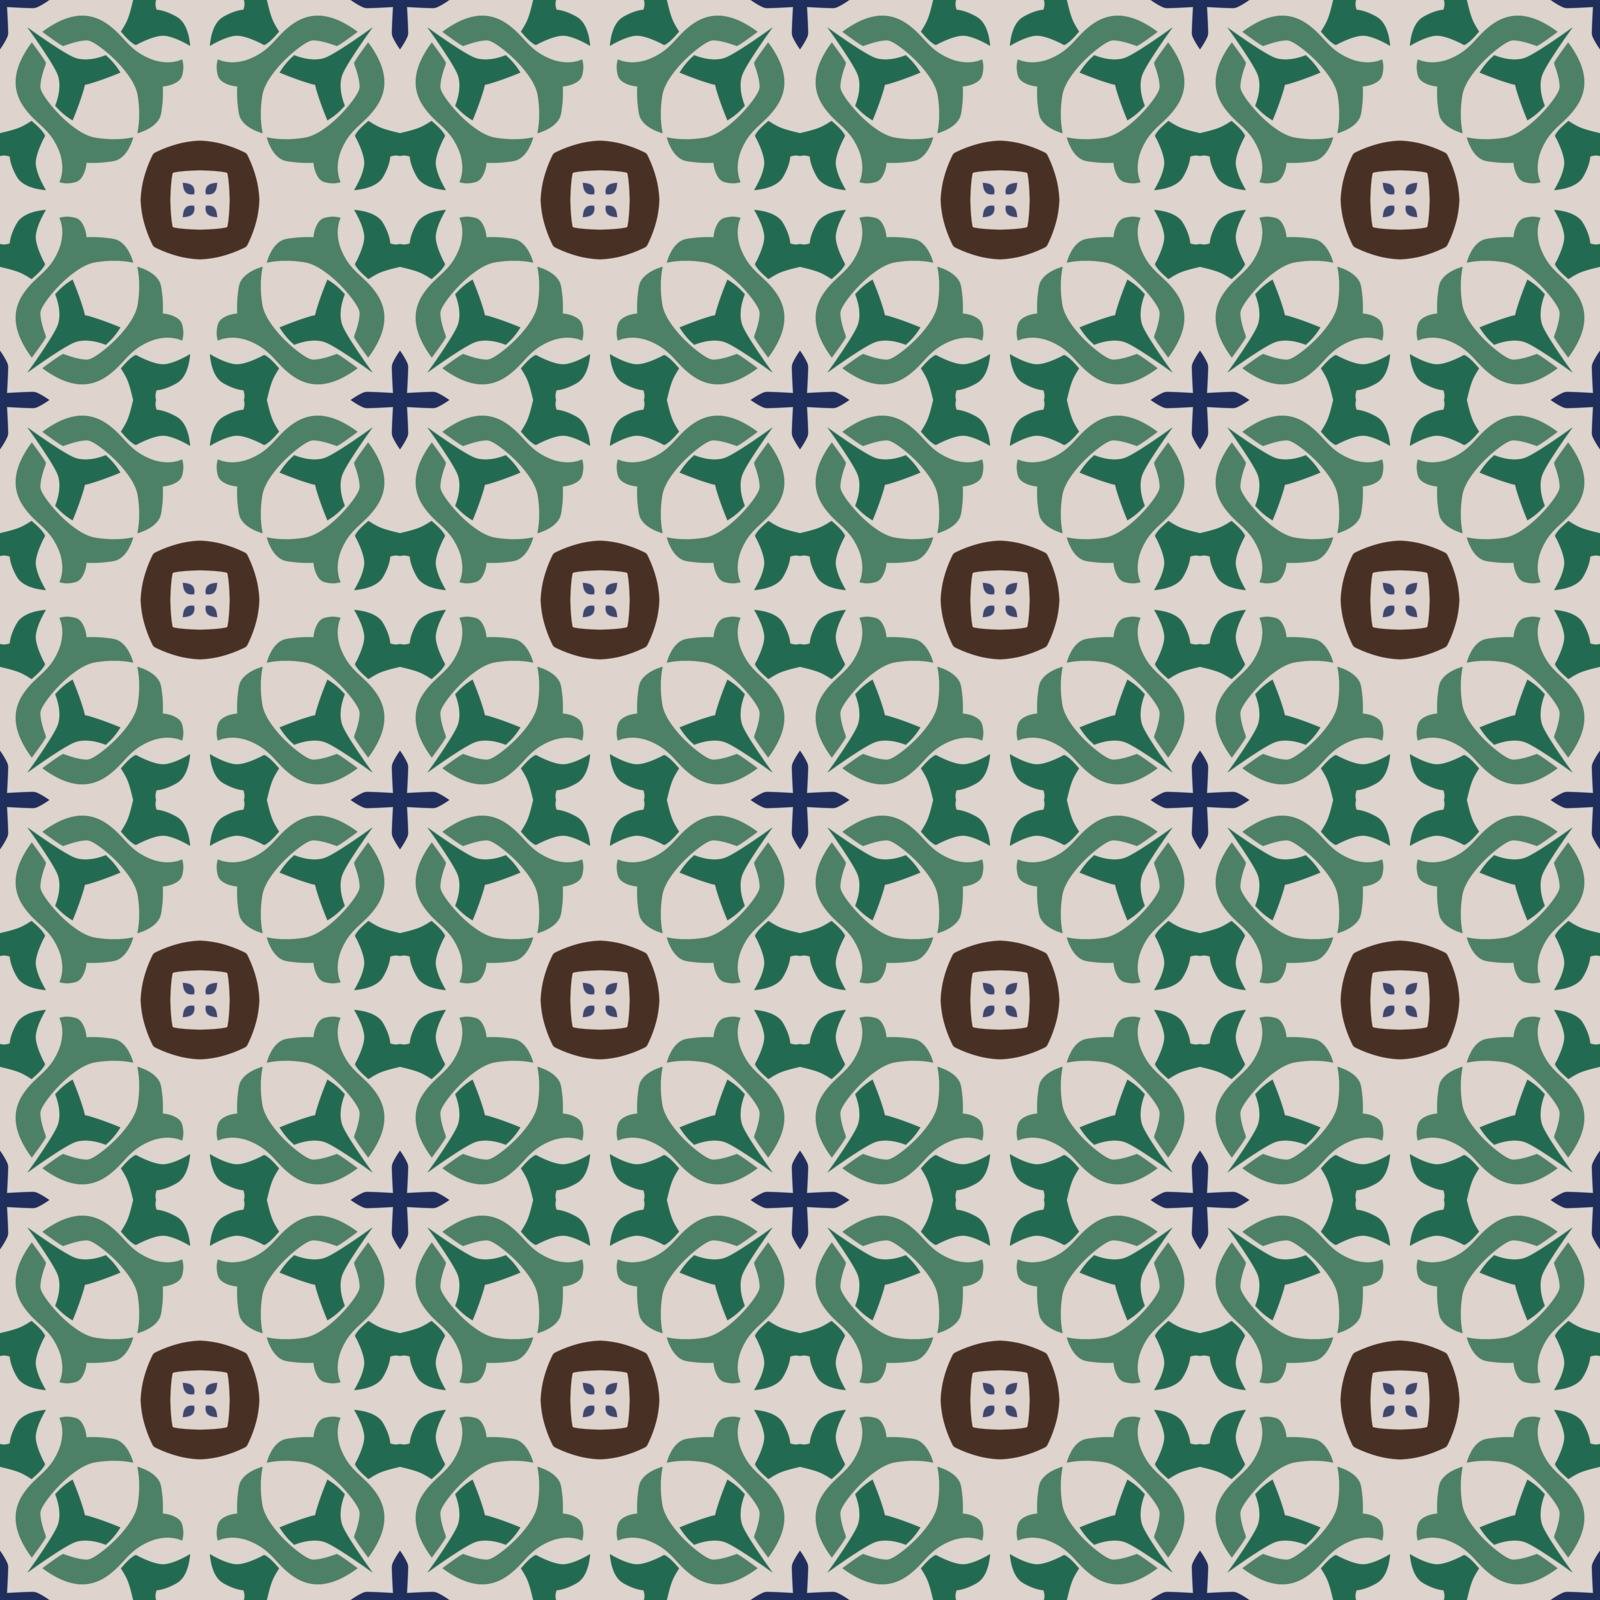 Seamless illustrated pattern made of abstract elements in beige,green, blue and brown